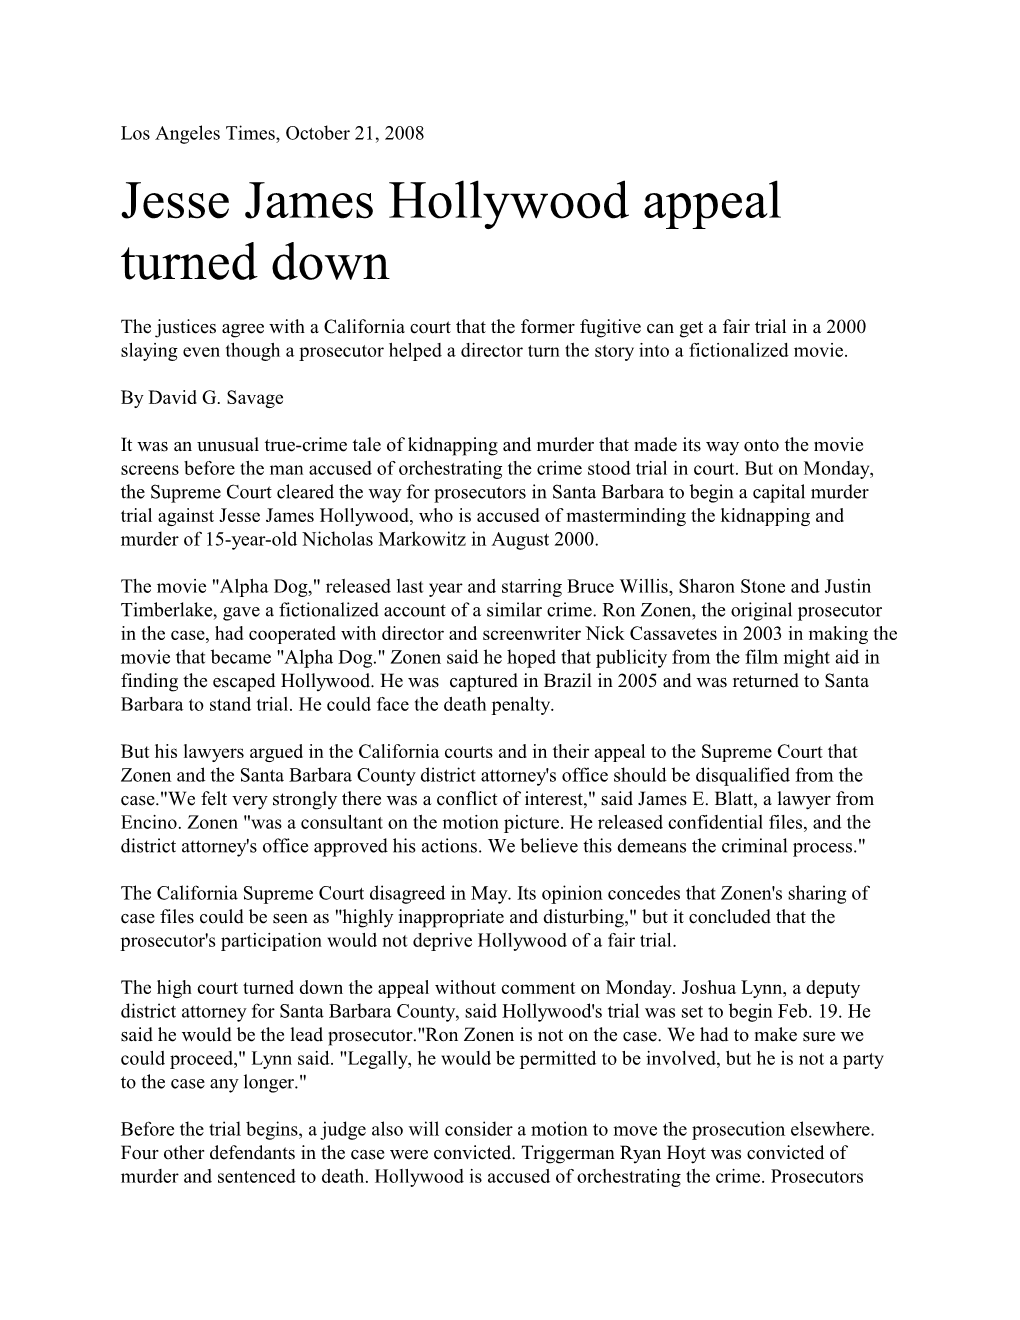 Jesse James Hollywood Appeal Turned Down